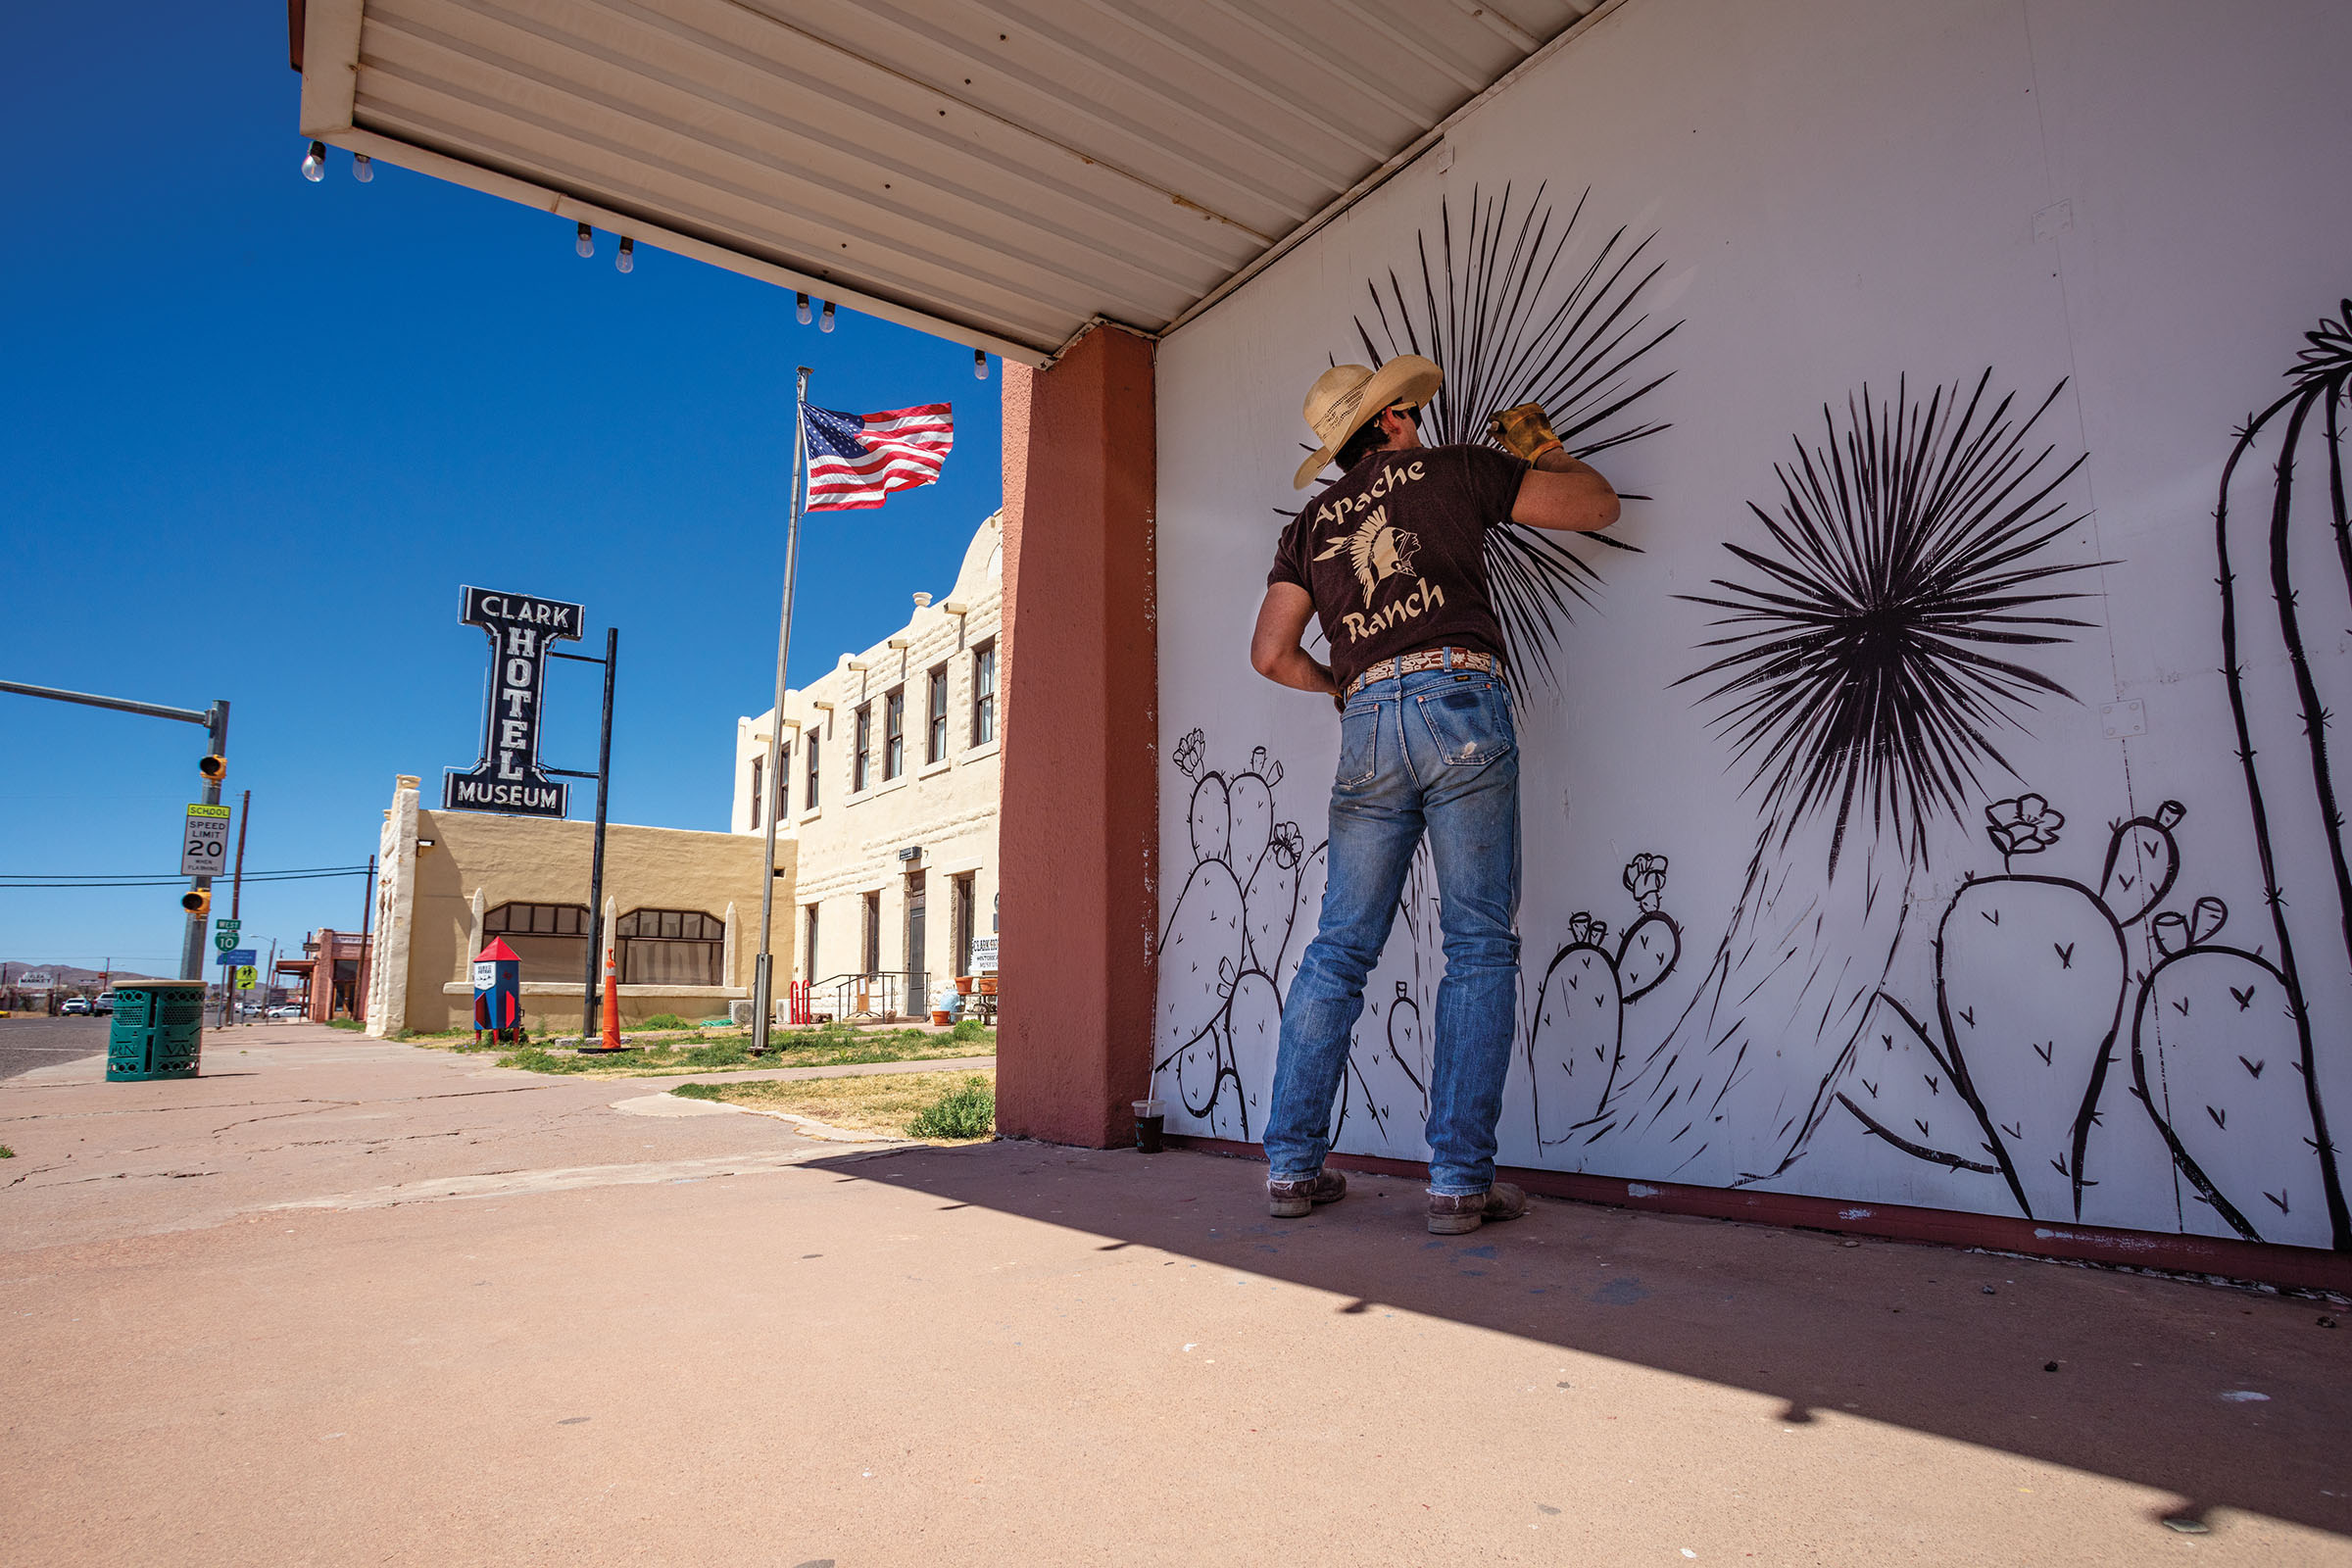 A man in a cowboy hat and blue jeans carefully paints a black and white mural in a desert scene next to an American flag